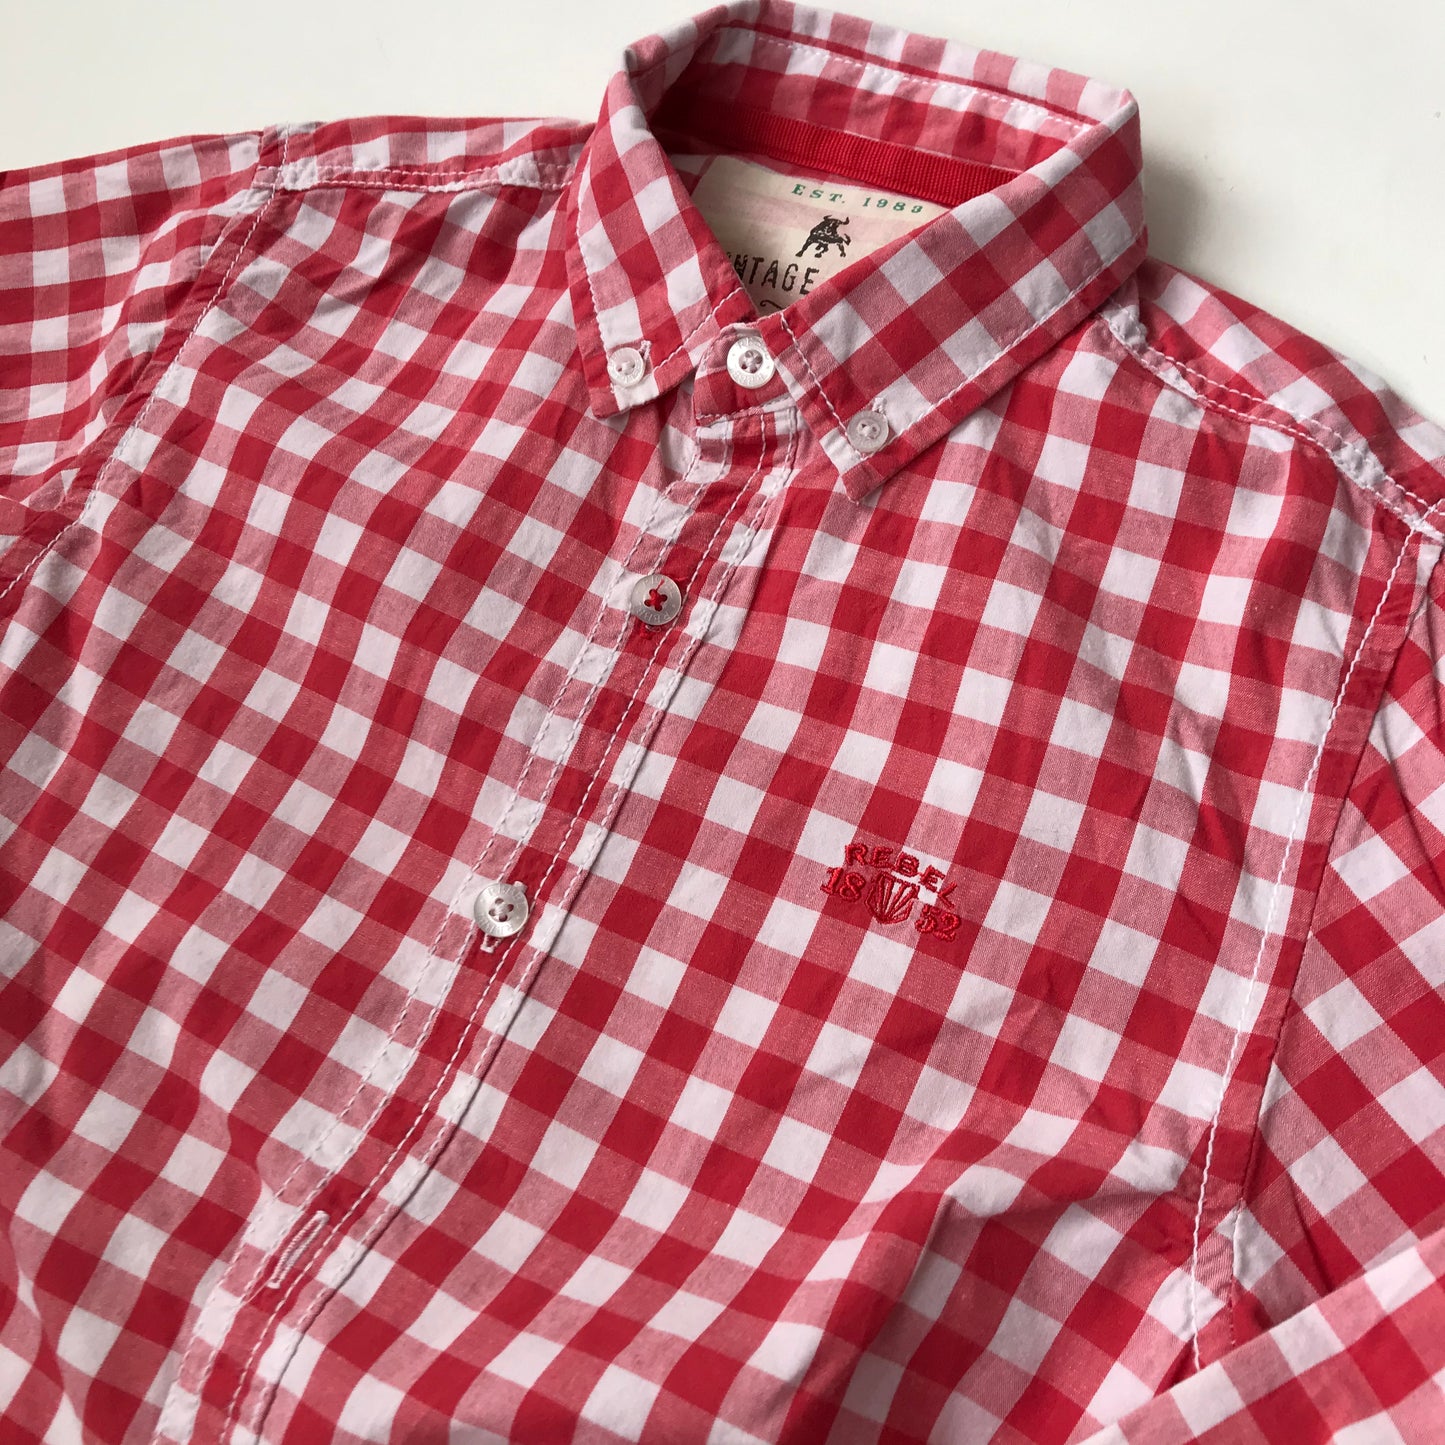 Shirt - Red & White Check - Age 9